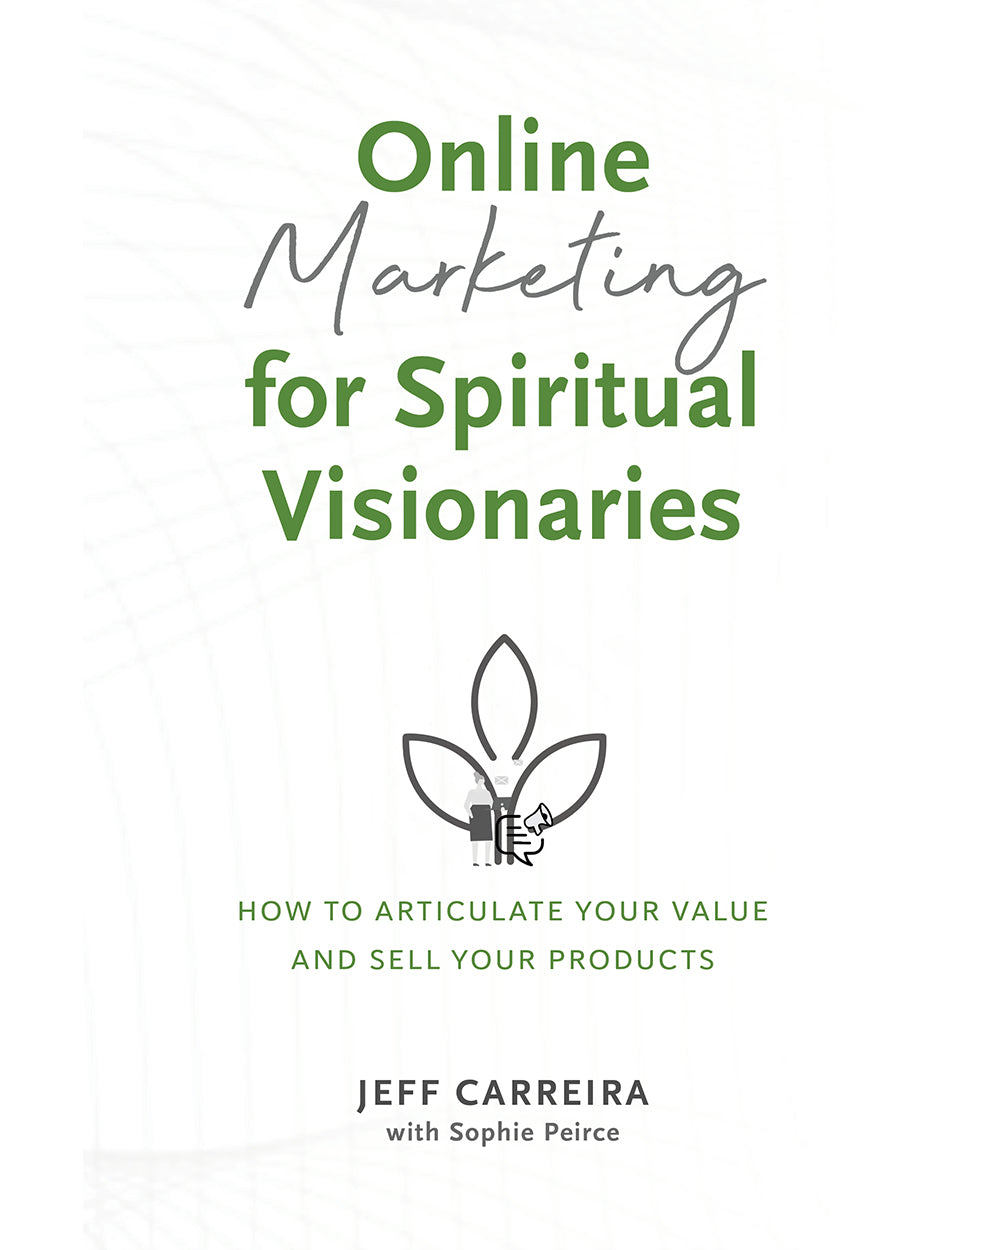 Online Marketing for Spiritual Visionaries: How to articulate your value and sell your products